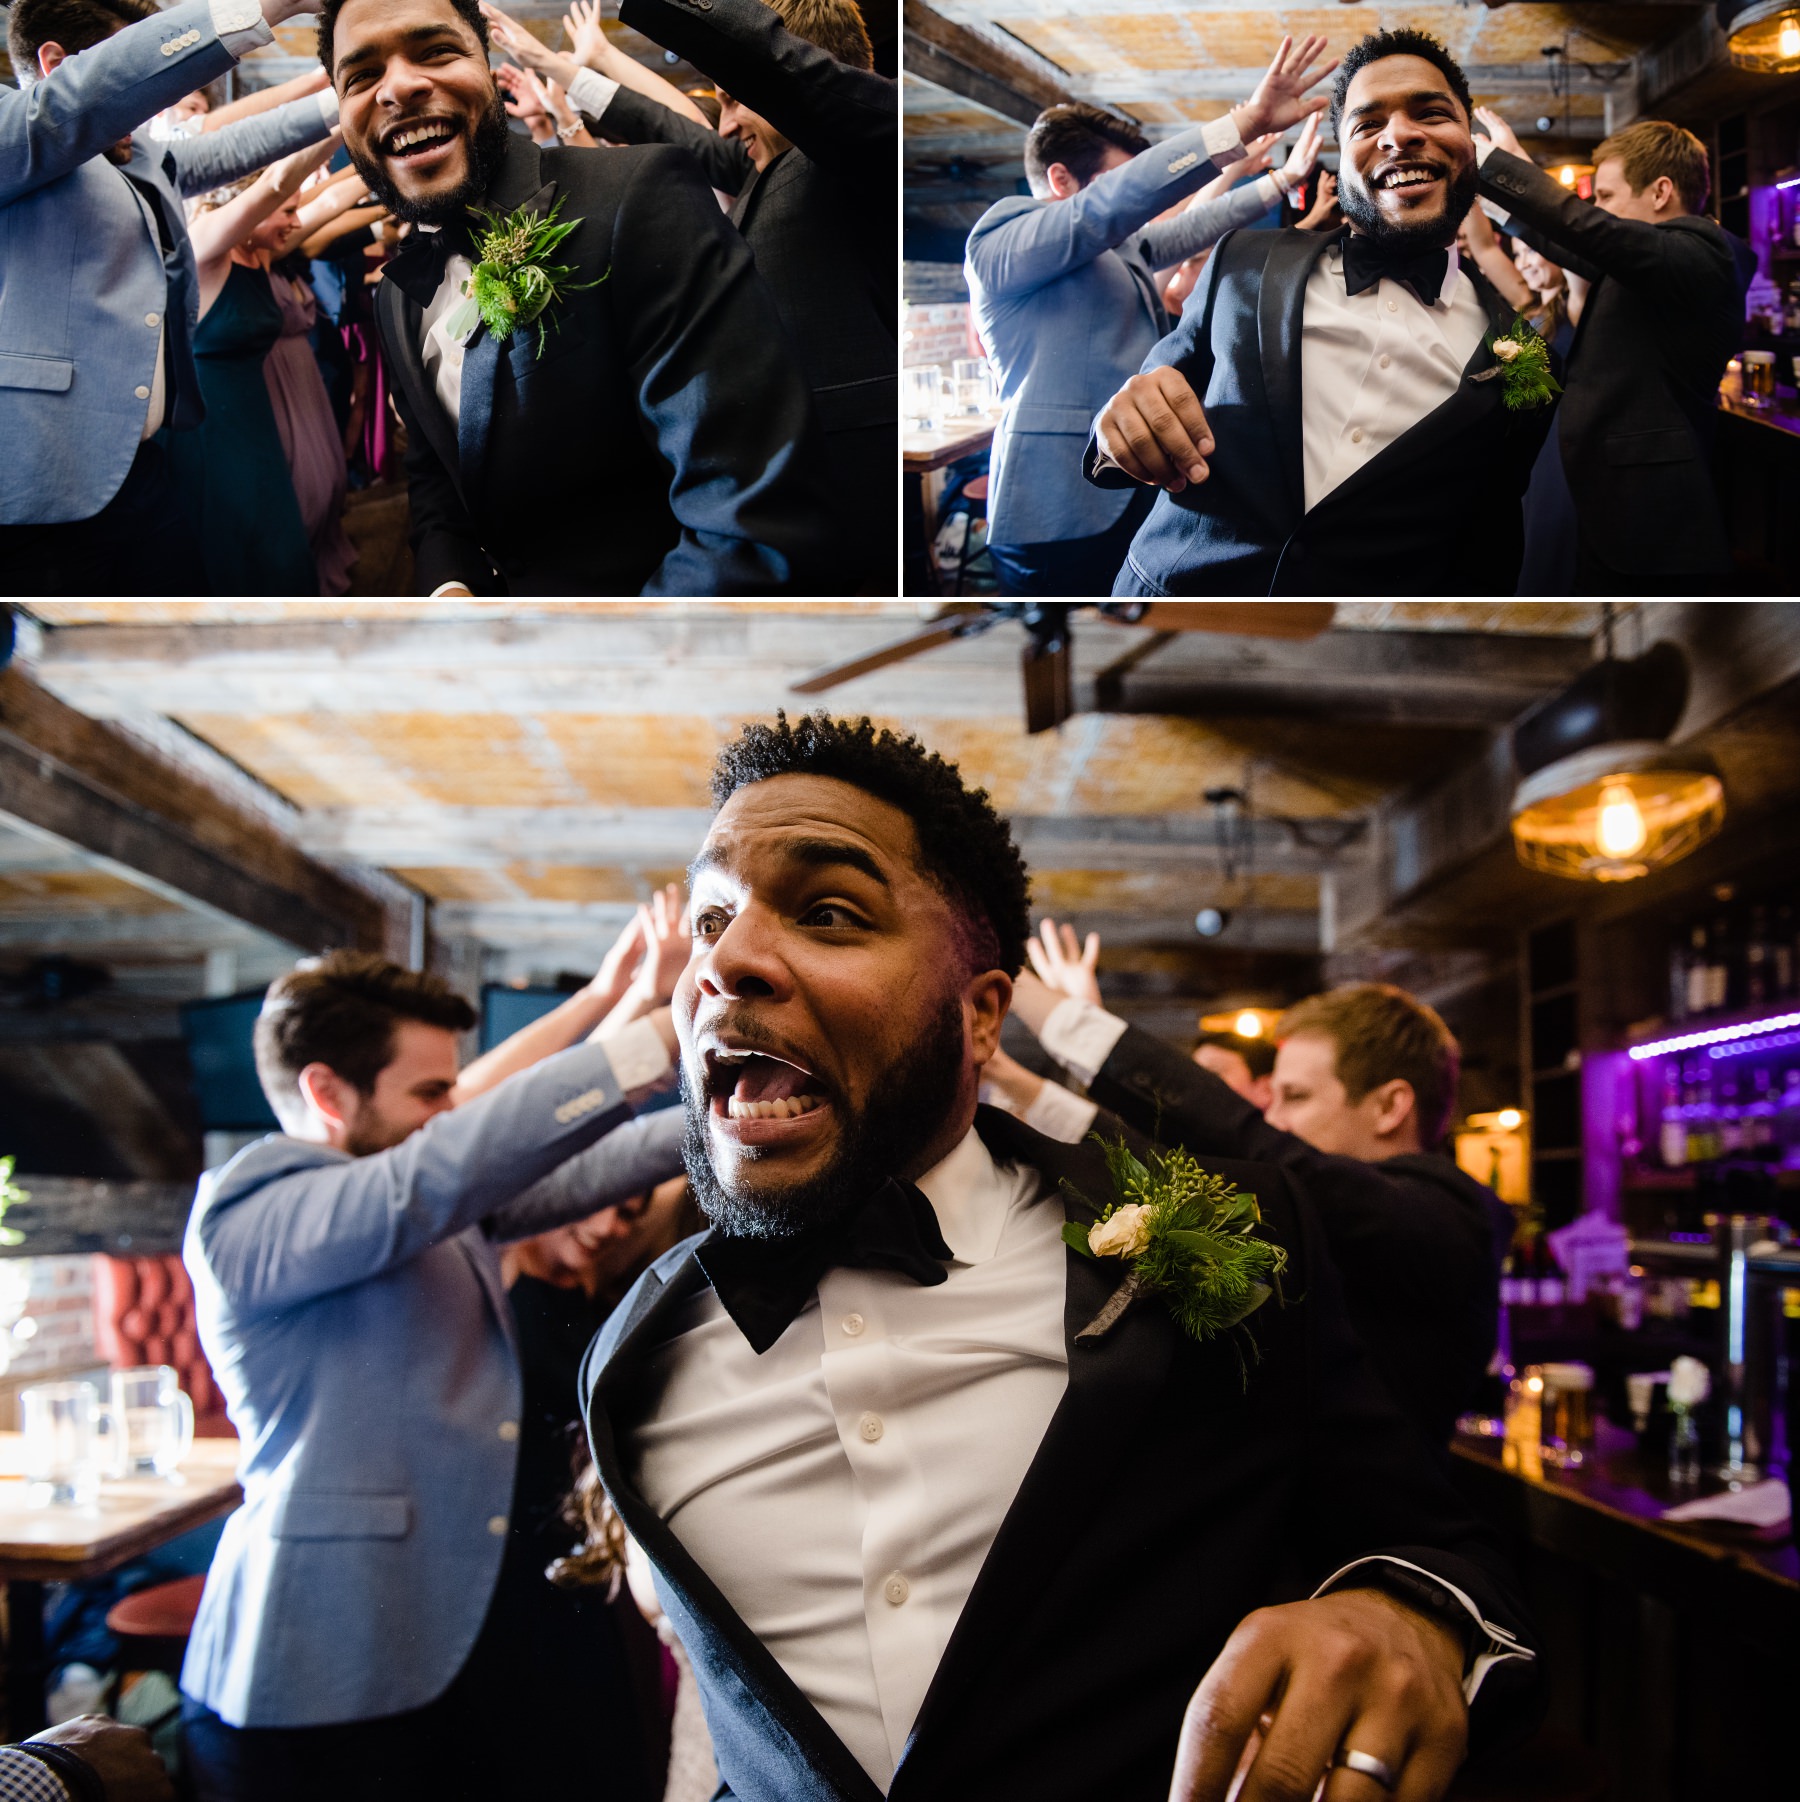  Caitlin and Bryon's wedding near Madison Square Park at the Giraffe Hotel in Midtown Manhattan. We approached this day as photojournalist wedding photographers first, aiming to create natural, authentic, but creative photos that tell an emotional an